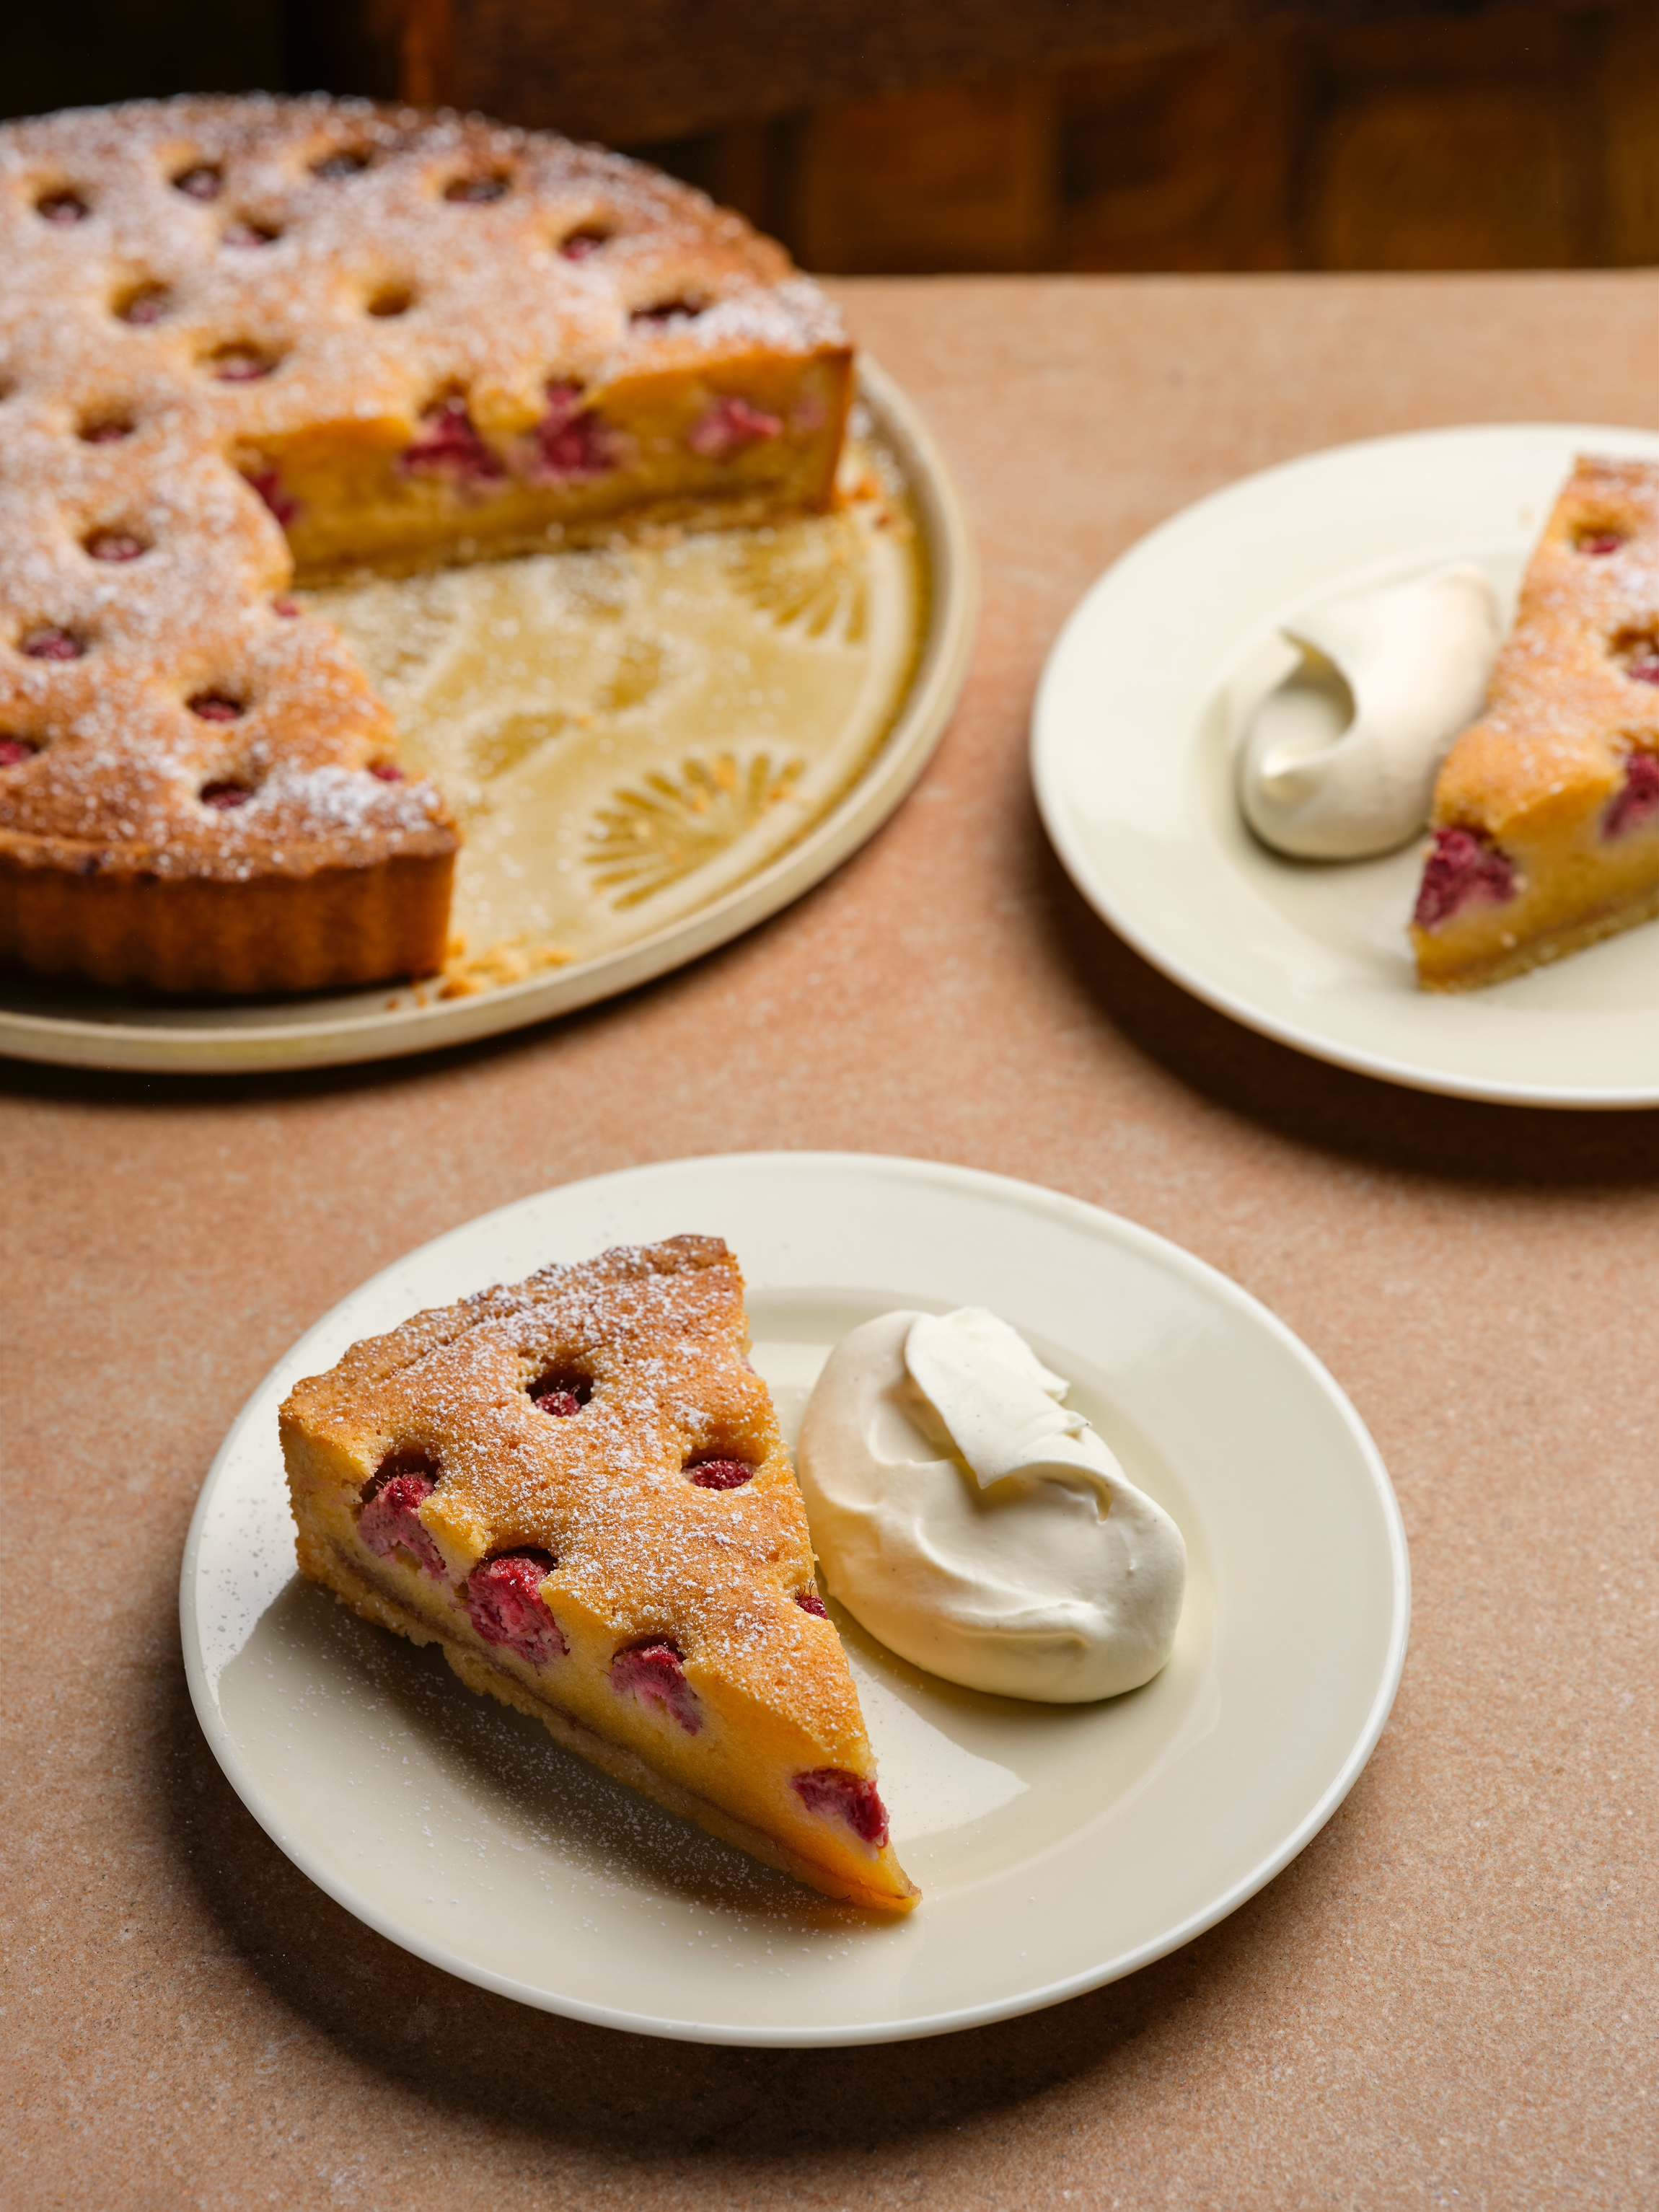 Almond and raspberry frangipani tart from Michel Roux At Home